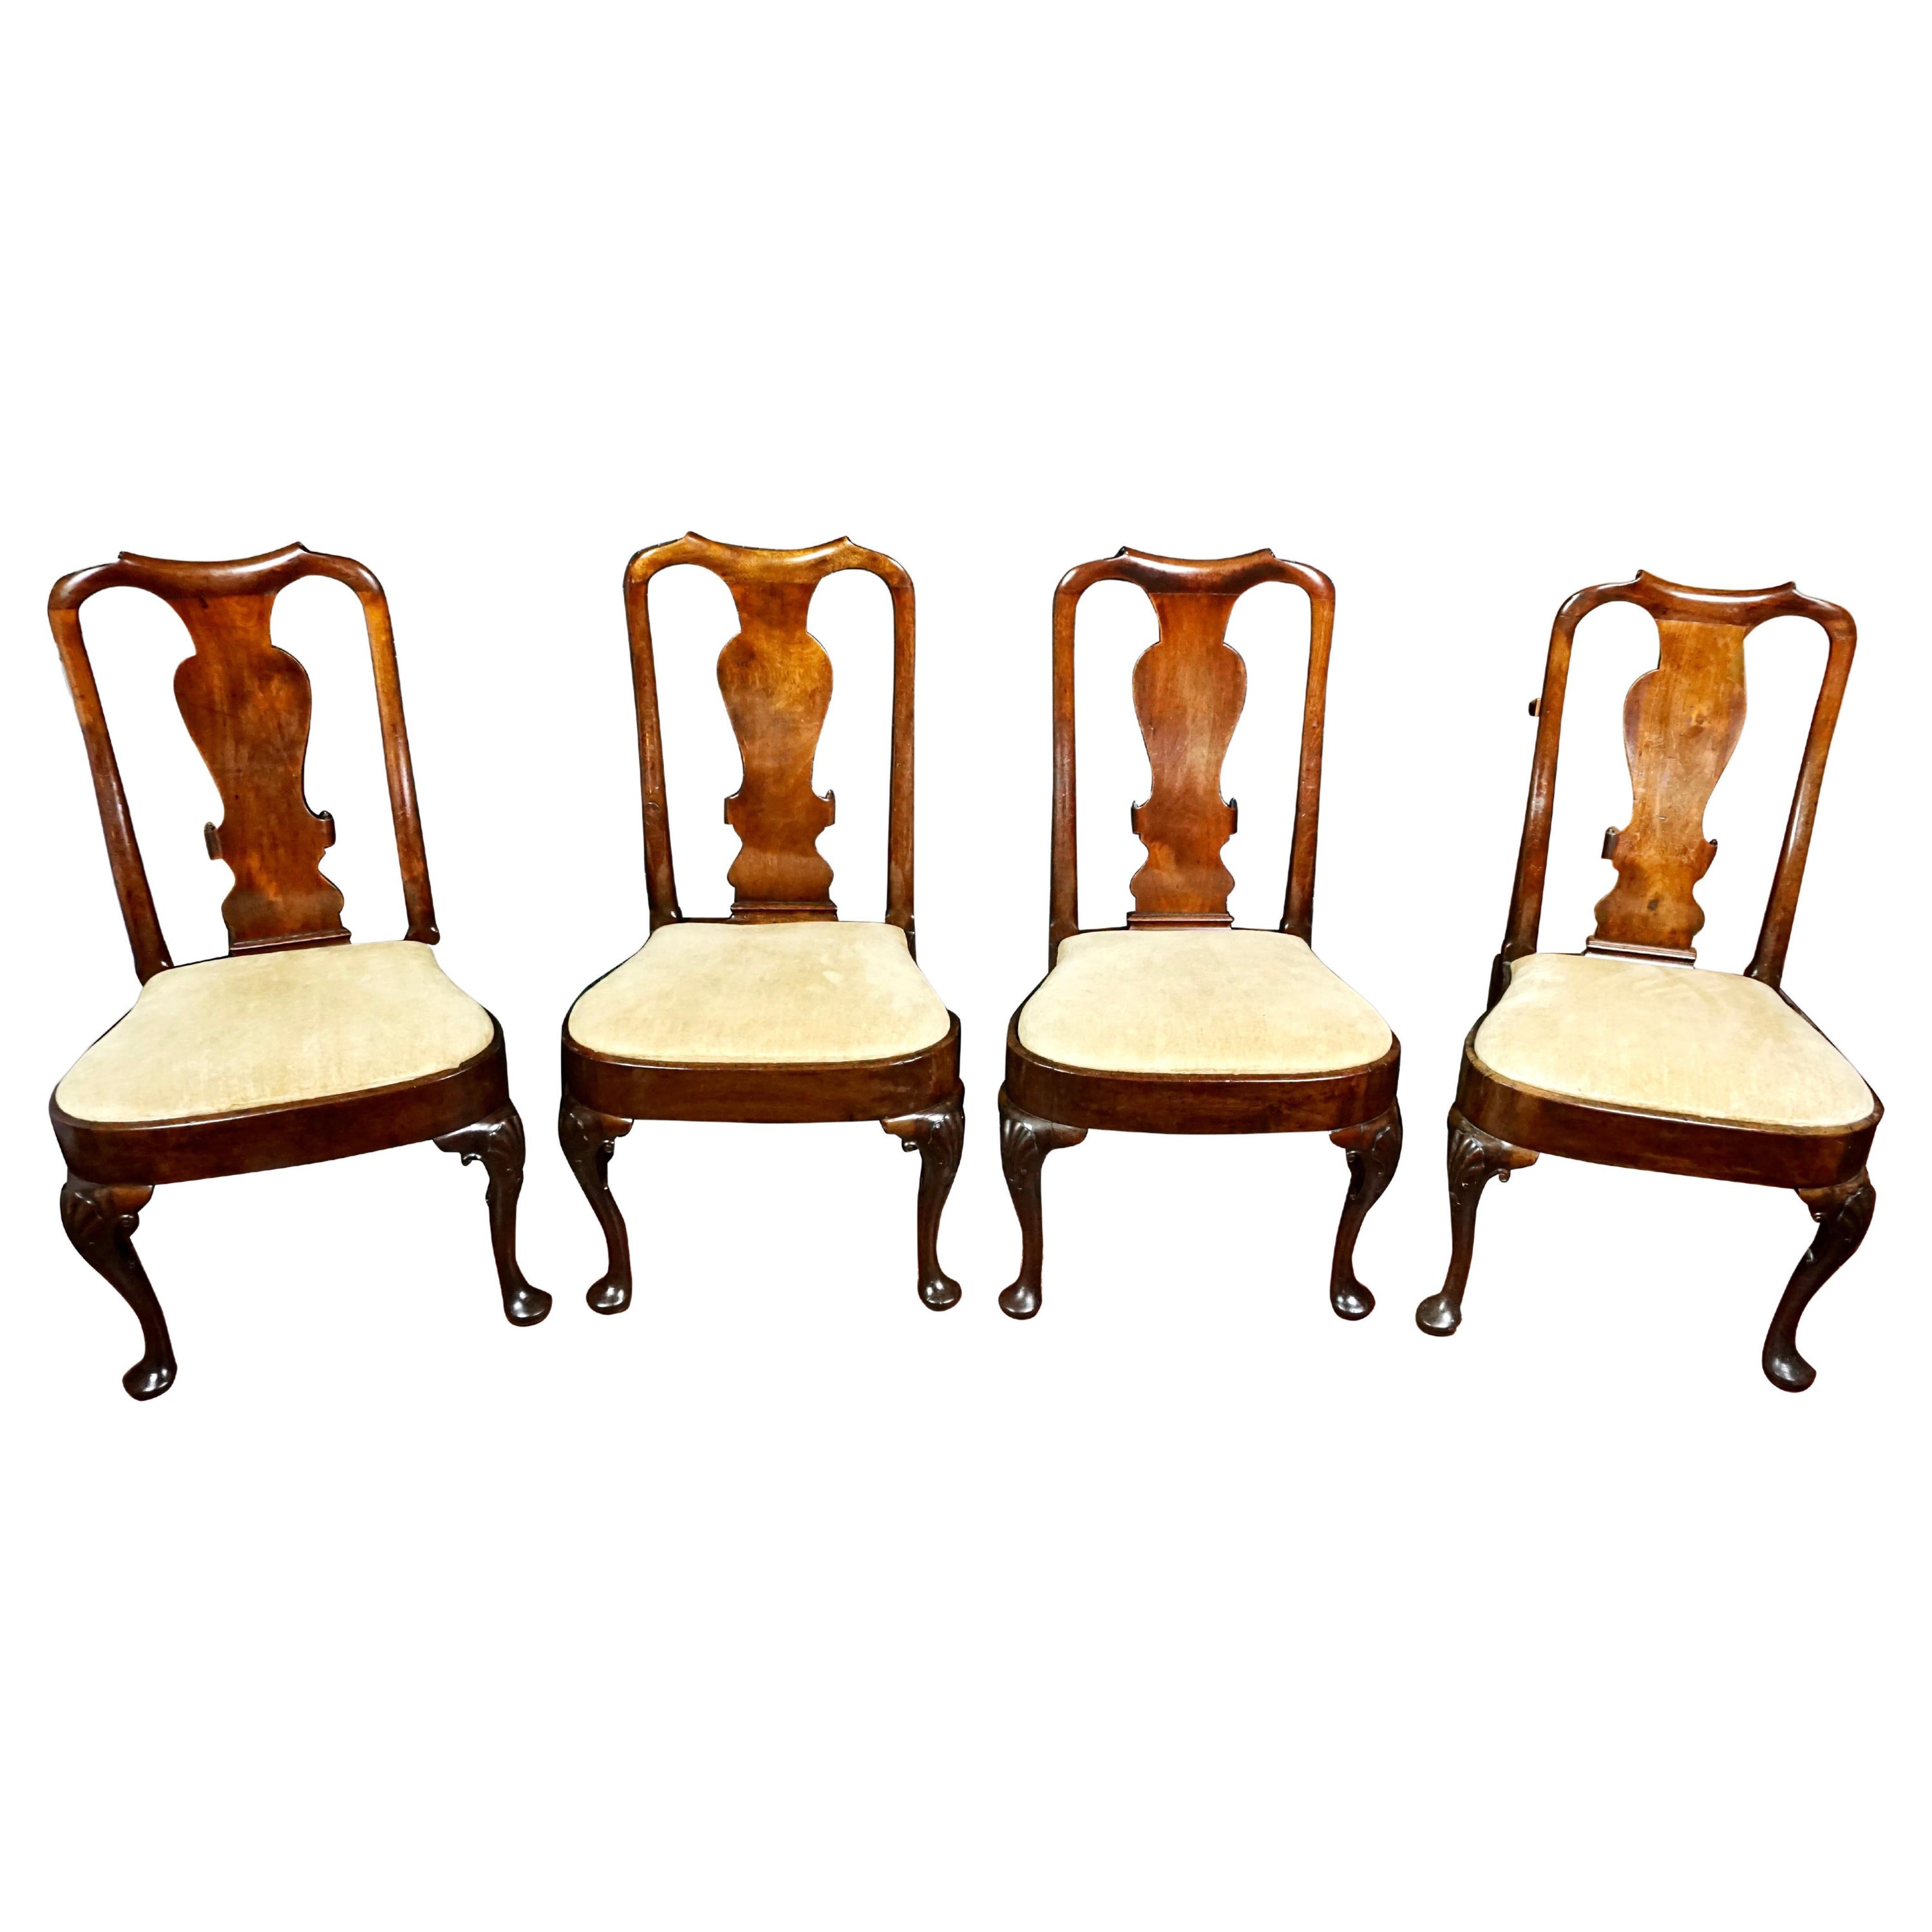 Set of Four English George II Period Walnut Side Chairs with Shelled Carved Legs For Sale